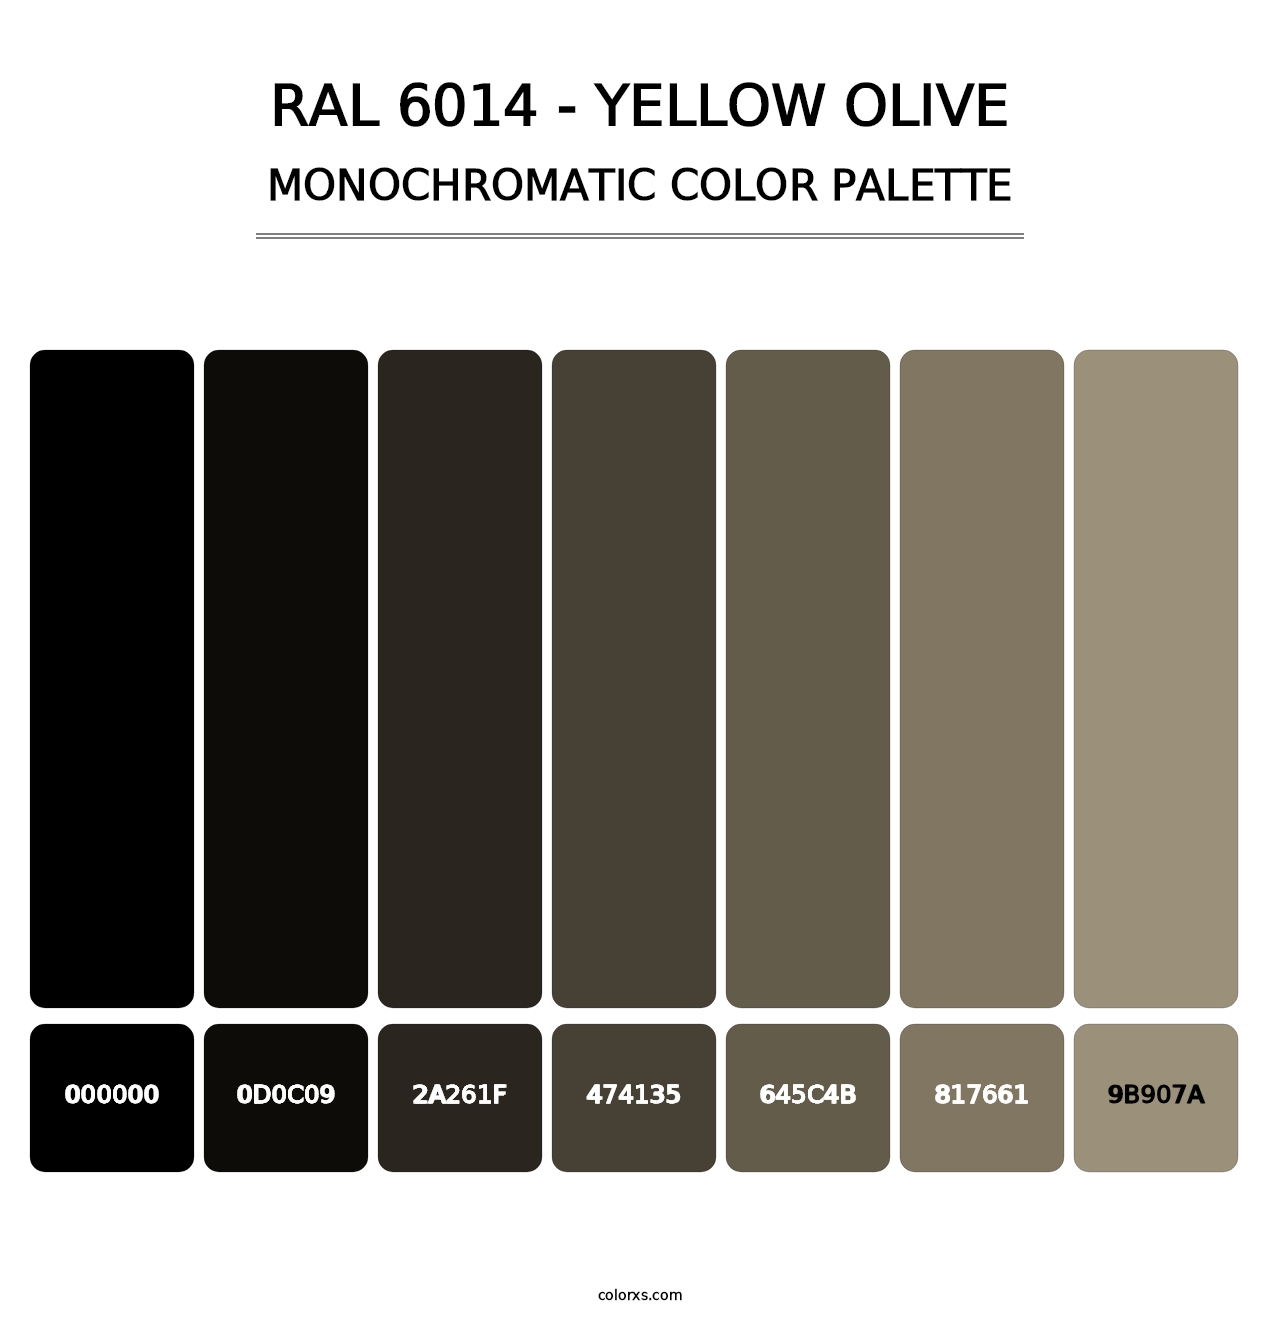 RAL 6014 - Yellow Olive - Monochromatic Color Palette